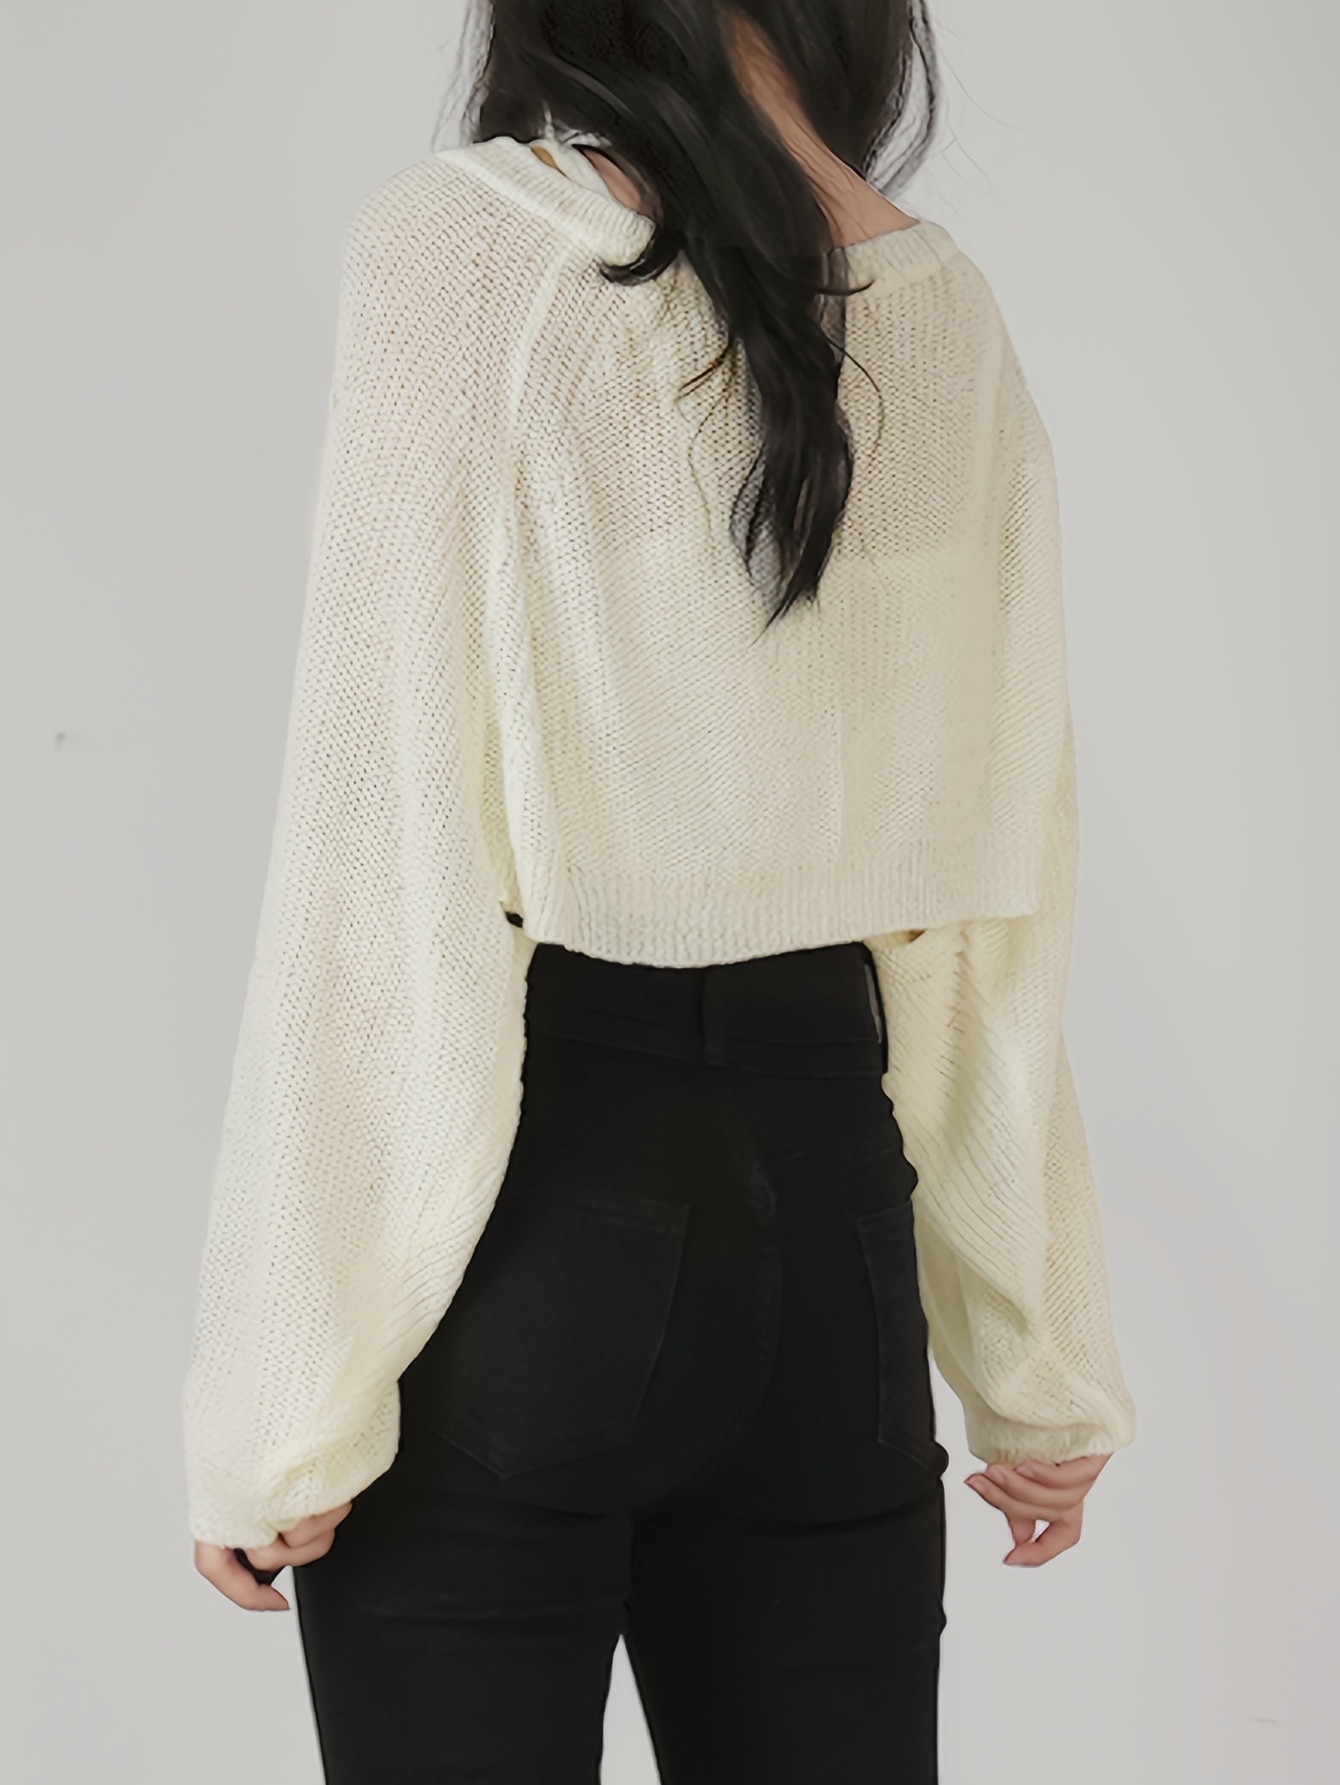 Knit Lace Cami Top & Long Sleeve Shrug